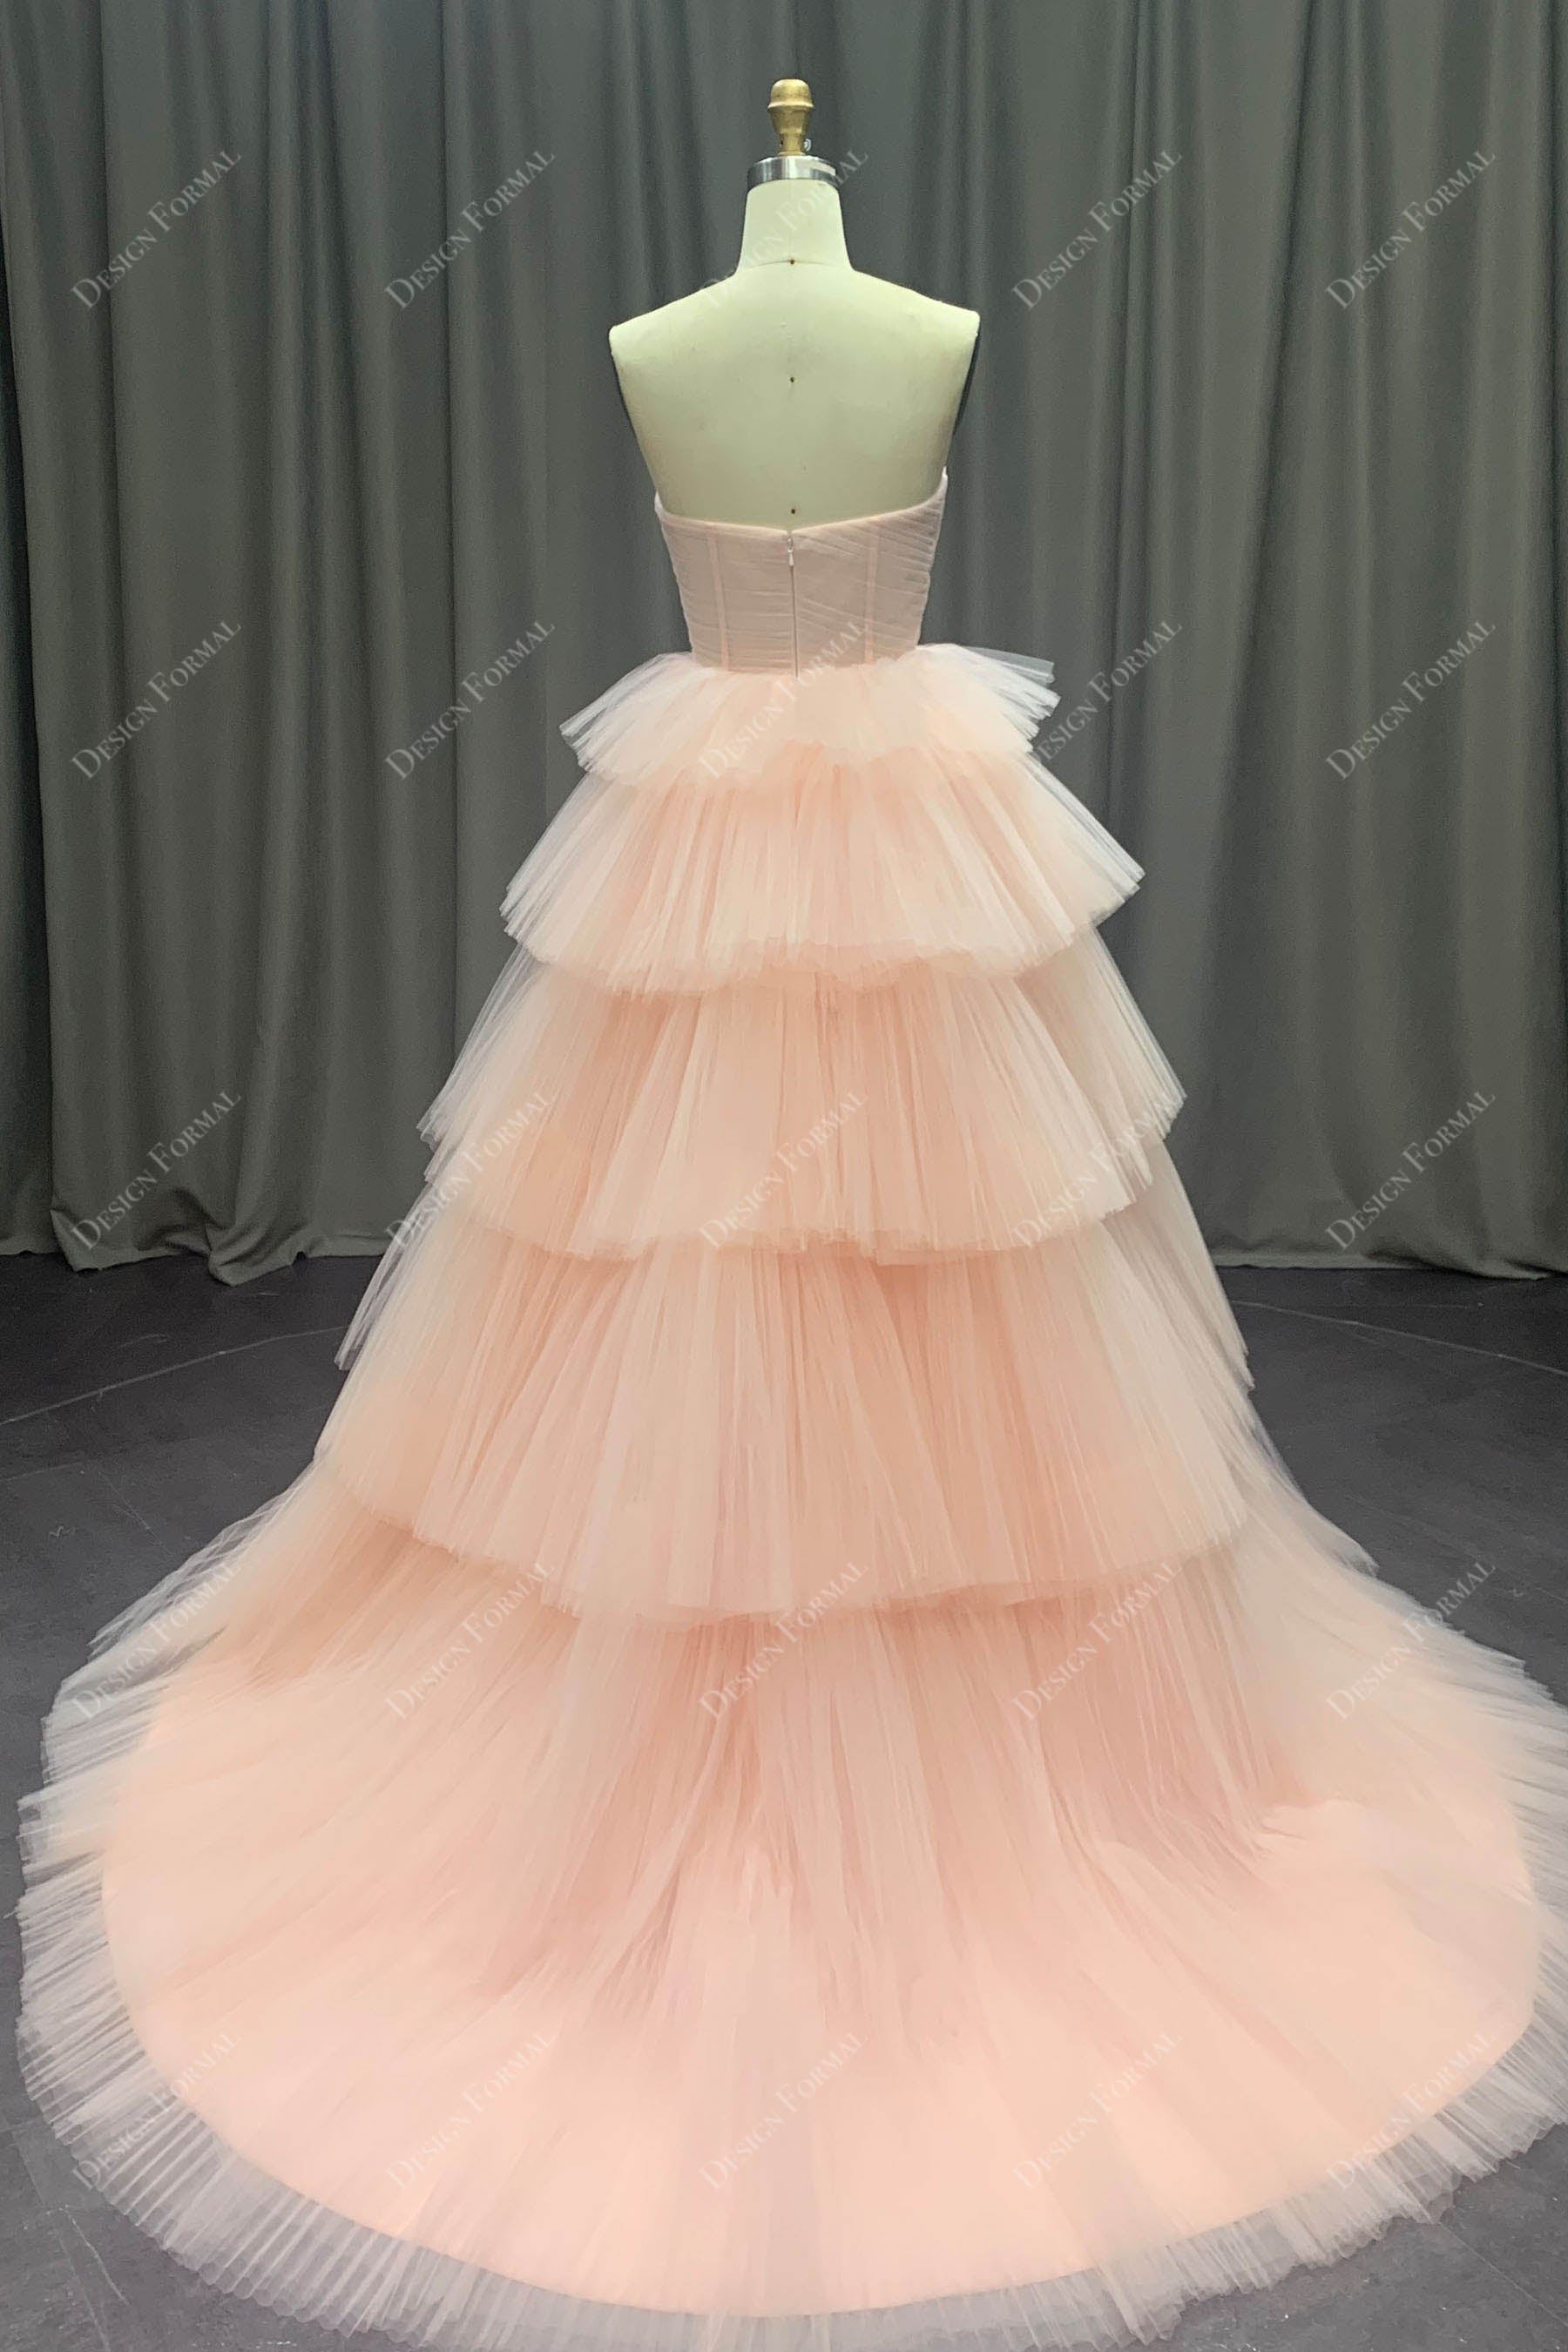 Blushing Pink Designer Tiered Pleated Tulle Bridal Gown